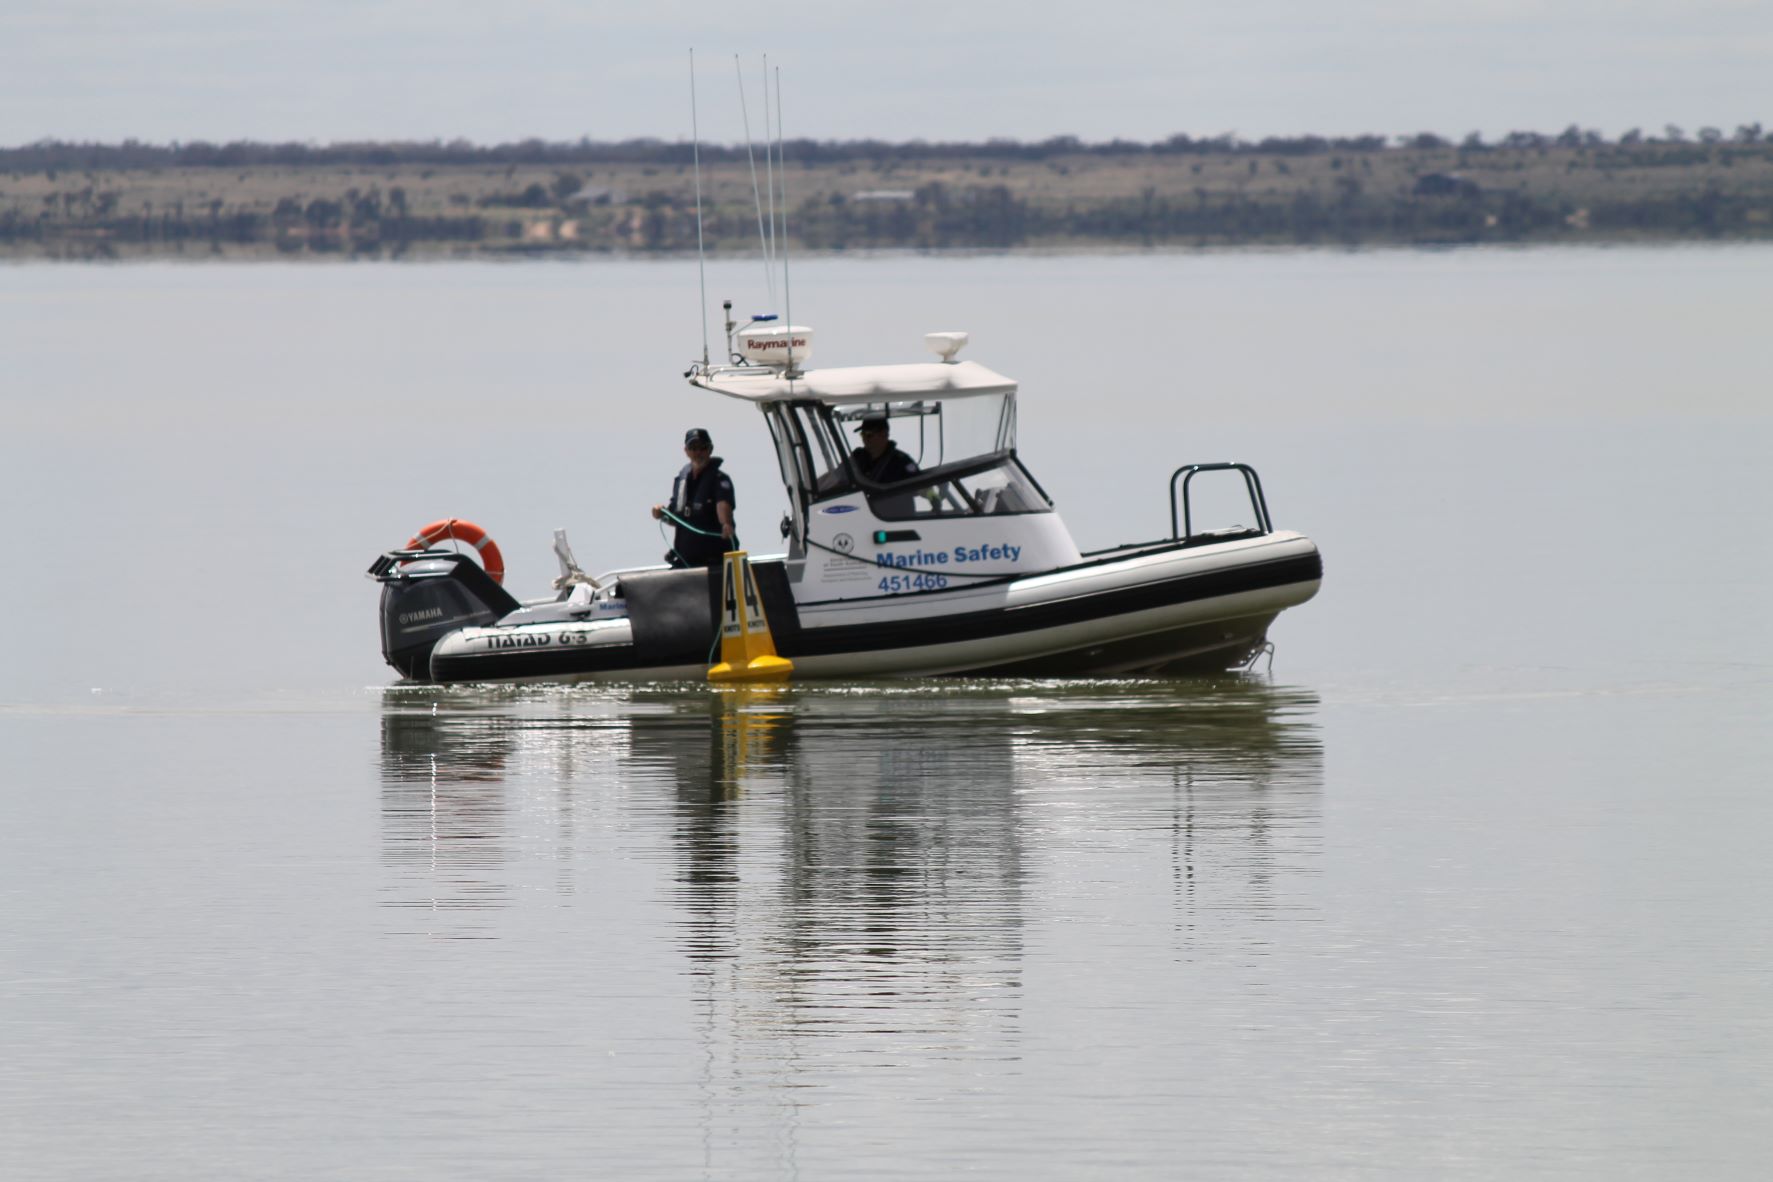 Marine Safety Boat on Murray River deploying a yellow 4 knot buoy